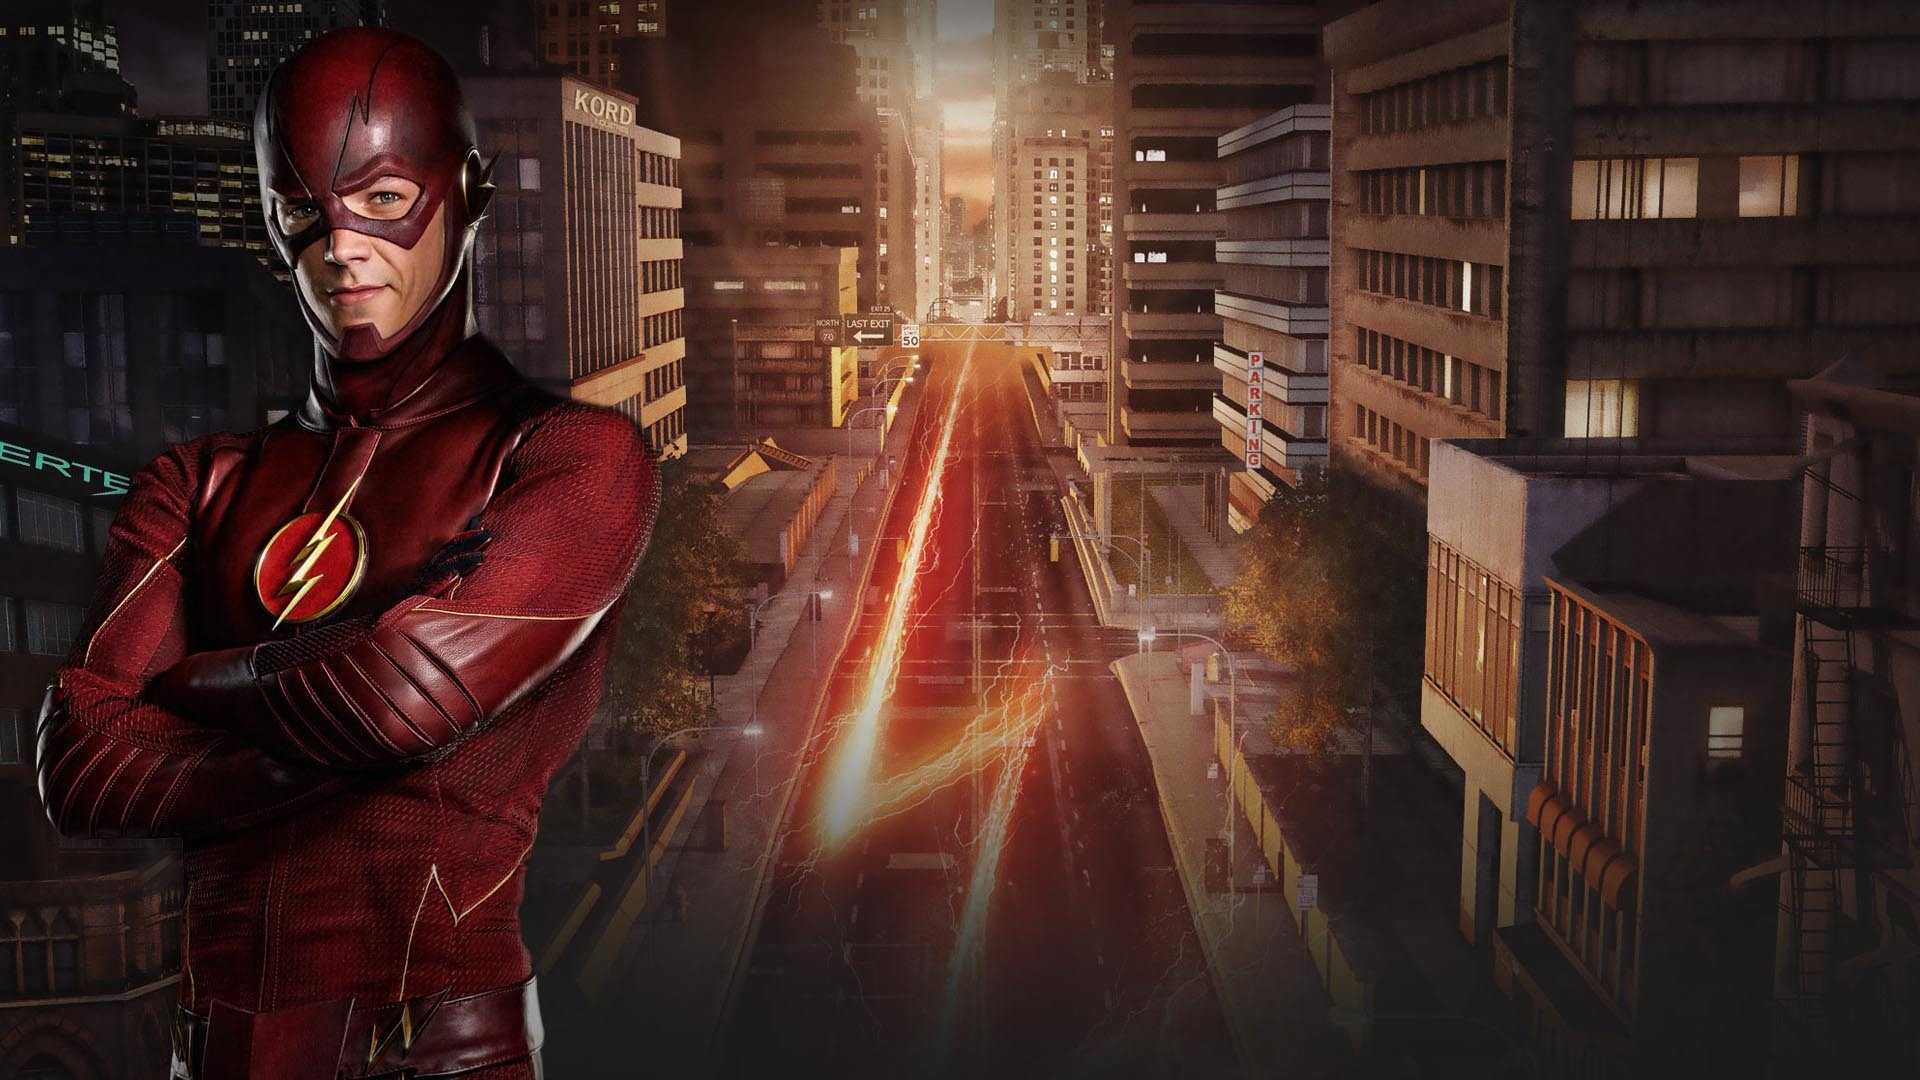 25 The Flash (2014) HD Wallpapers | Backgrounds - Wallpaper Abyss